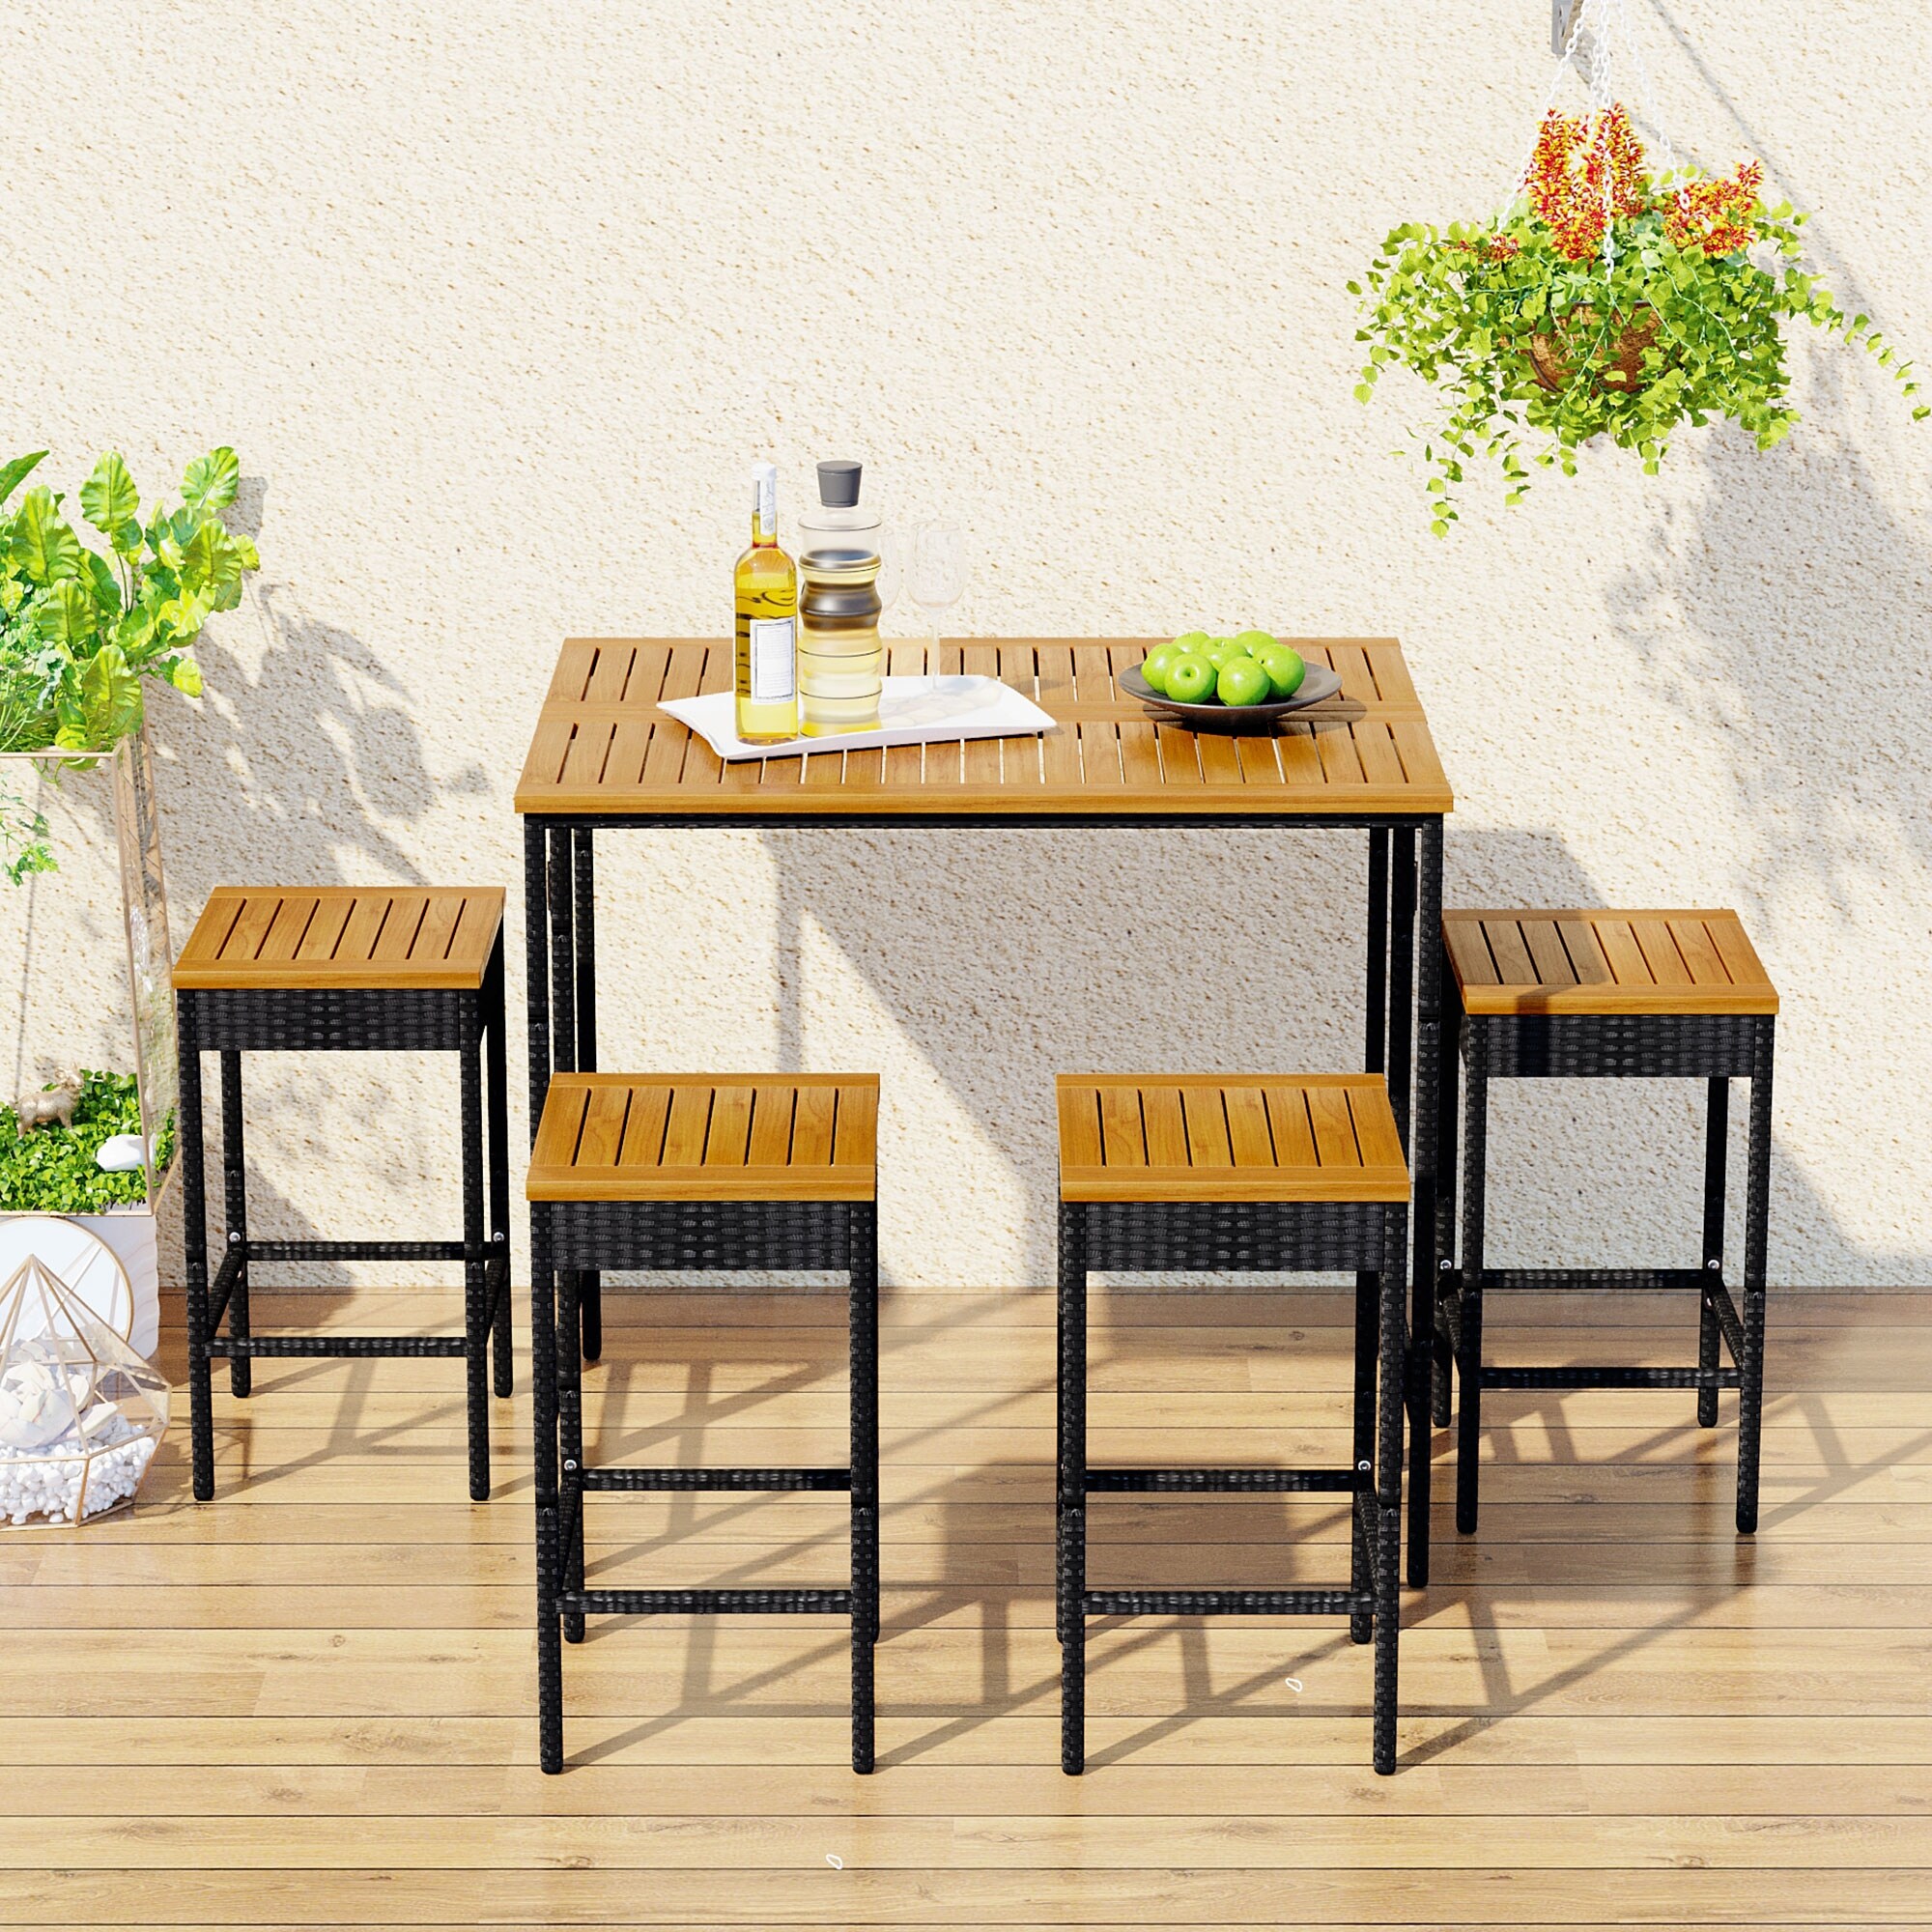 5-pcs Outdoor Wicker Bar Sets Garden Pe Rattan Wicker Dining Sets Square Stool Set Foldable Table High-dining Bistro Set  Brown